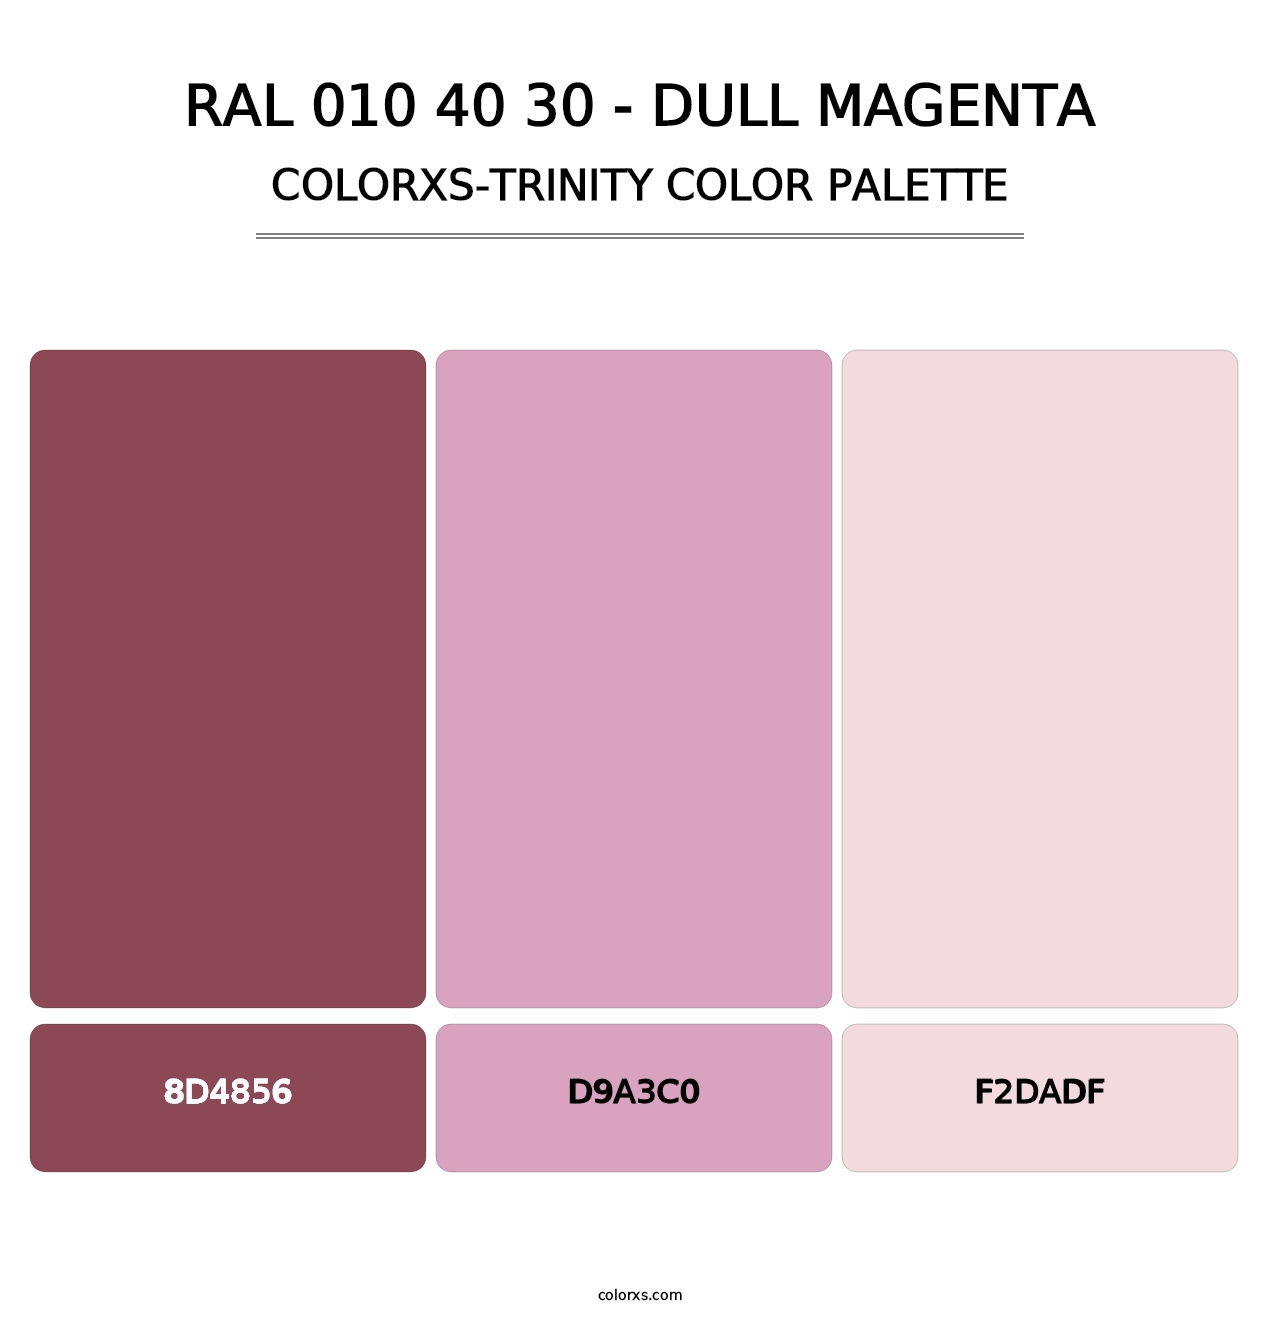 RAL 010 40 30 - Dull Magenta - Colorxs Trinity Palette